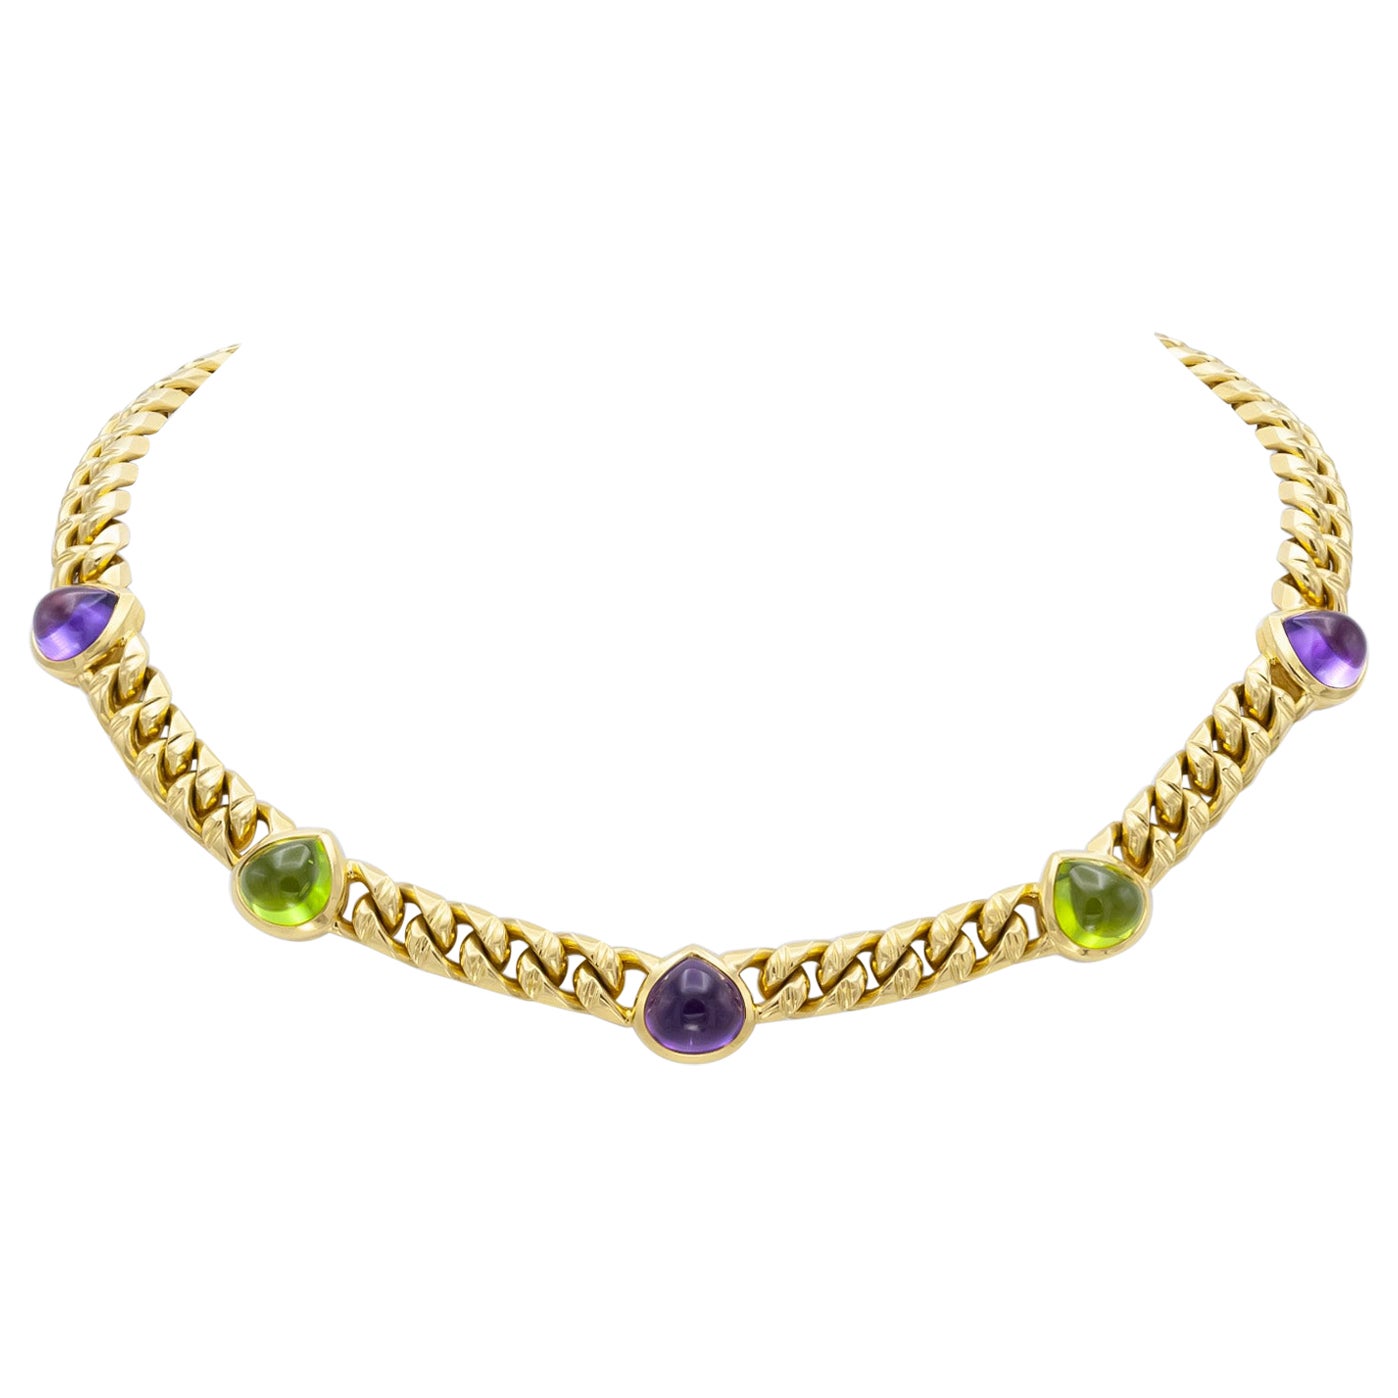 Bvlgari Cabochon Amethysts and Tourmalines Chain Necklace